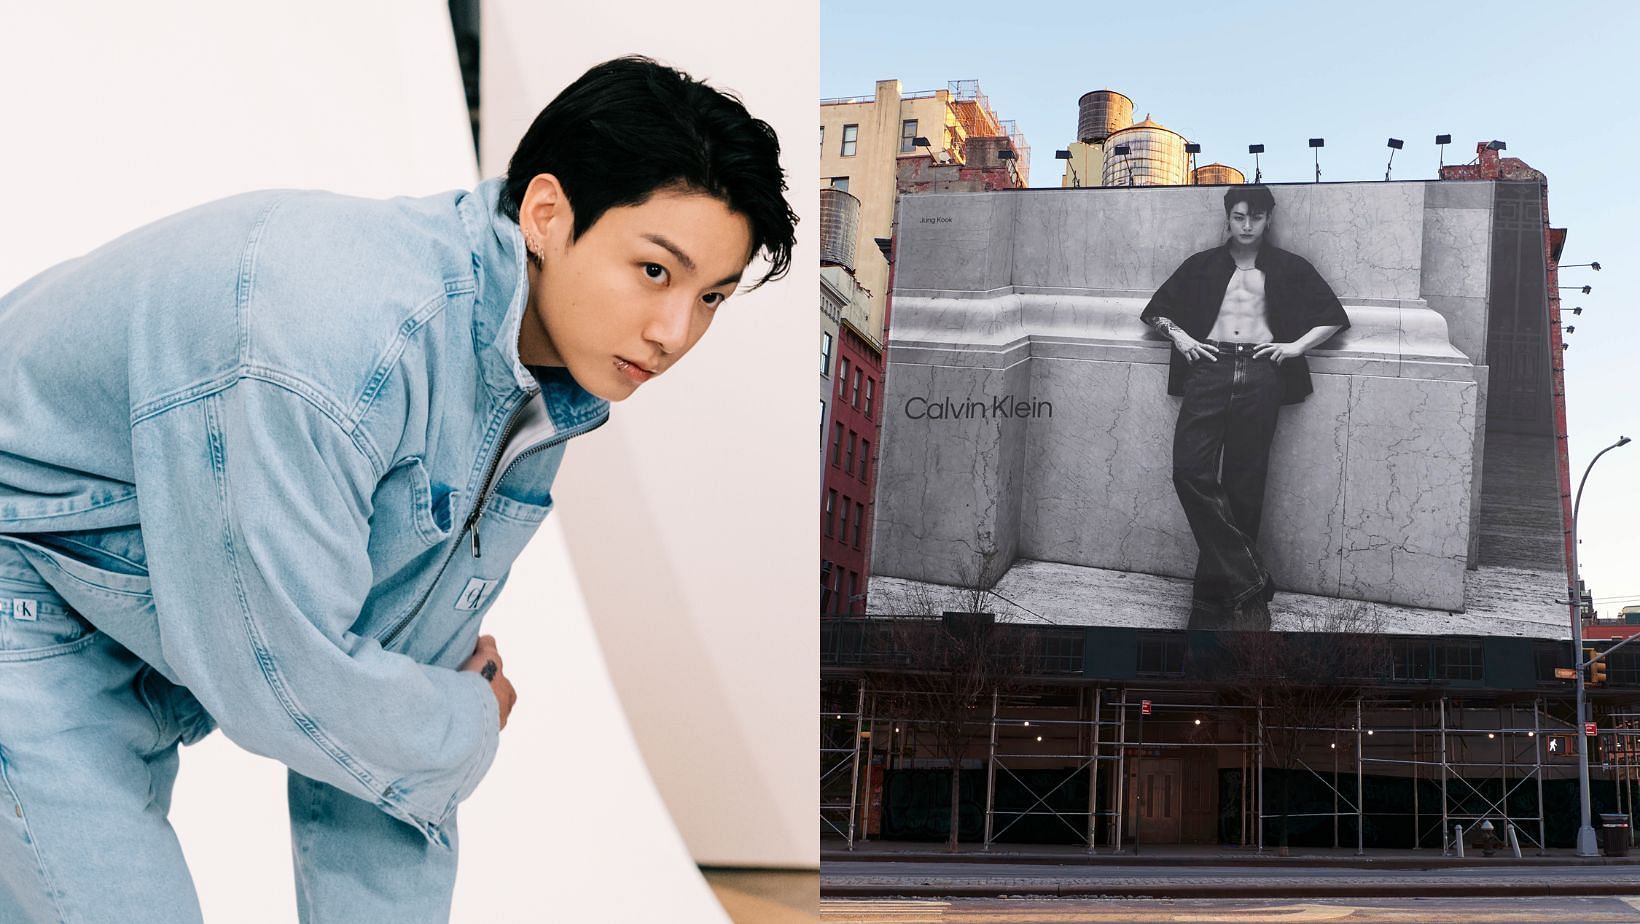 Calvin Klein deems Jungkook&rsquo;s billboard at Houston St. in New York City as &lsquo;A global landmark&rsquo;. (Images via X/@calvinklein)